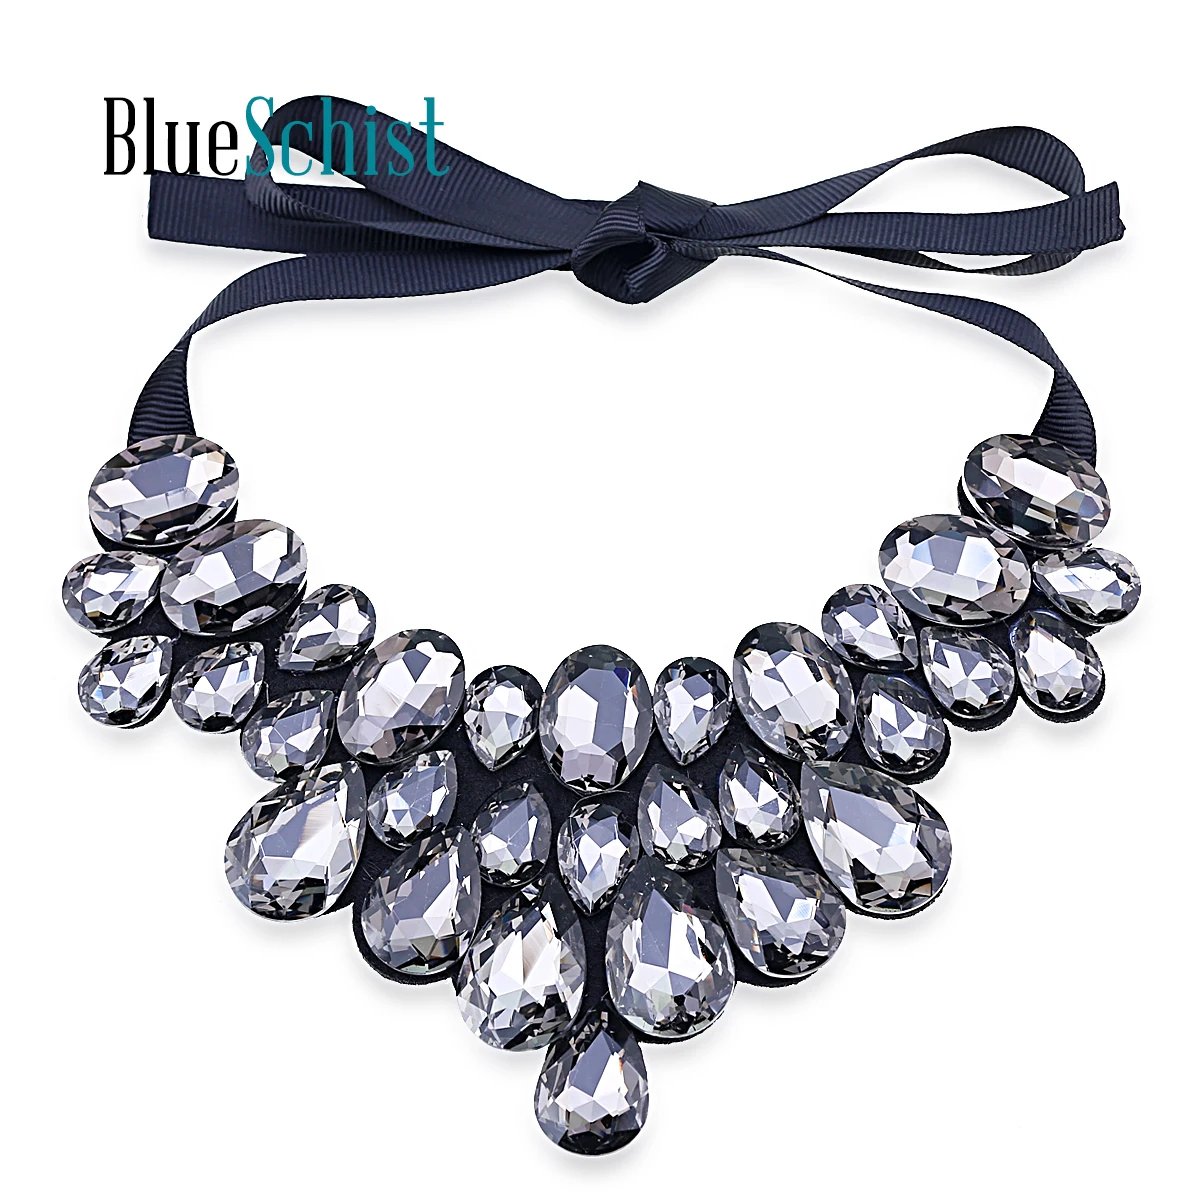 

Fashion Bohemia Crystal Choker Necklace Jewelry for Women Handmade Chunky Pendant Collar Accessory Wedding Party Prom Nice Gifts